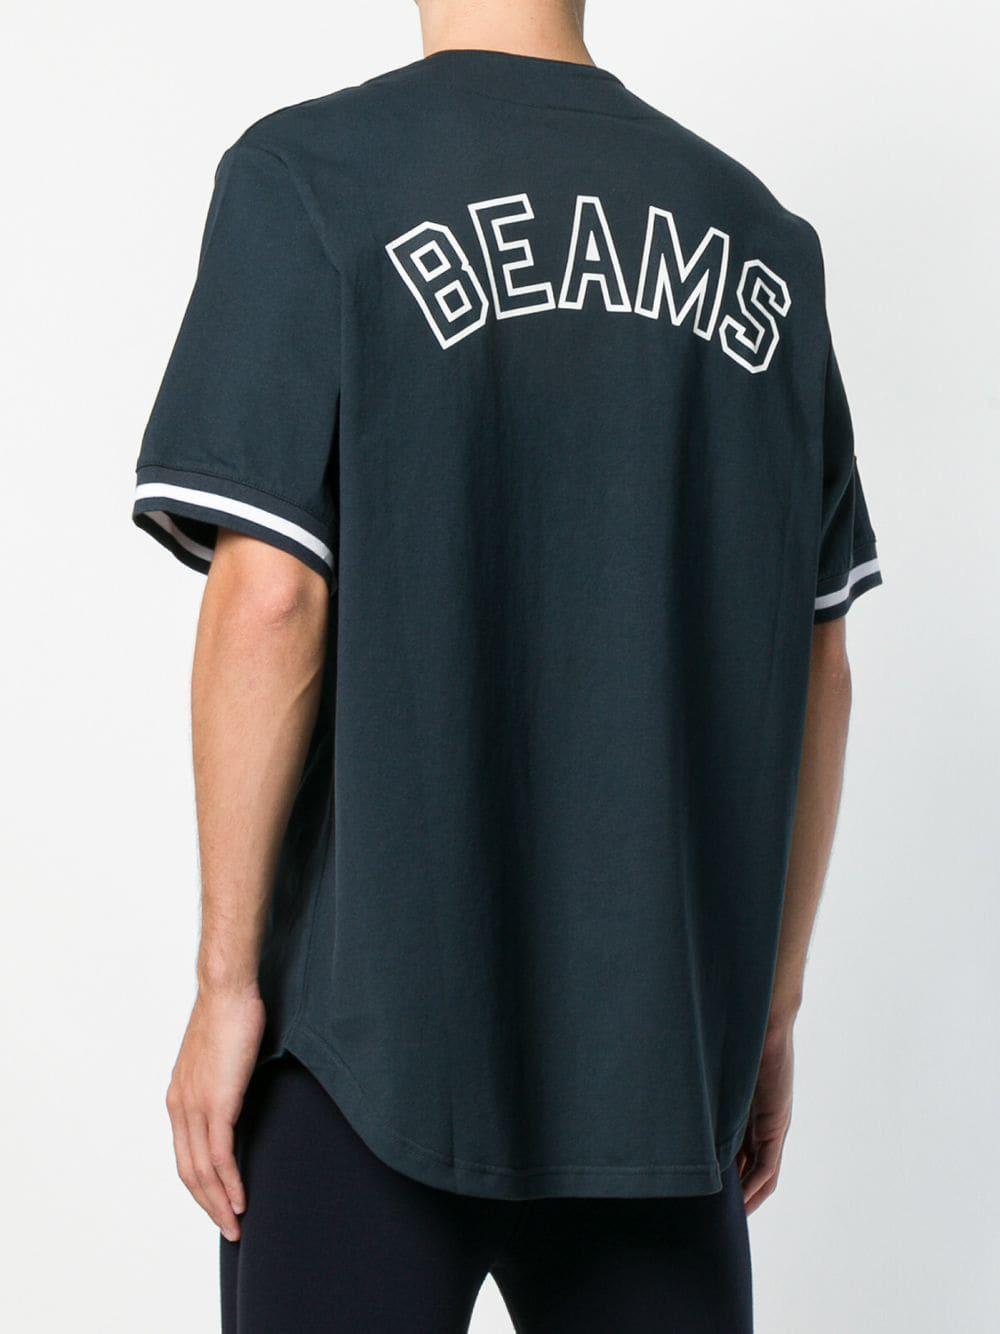 Champion Cotton X Beams Baseball T-shirt in Blue for Men - Lyst